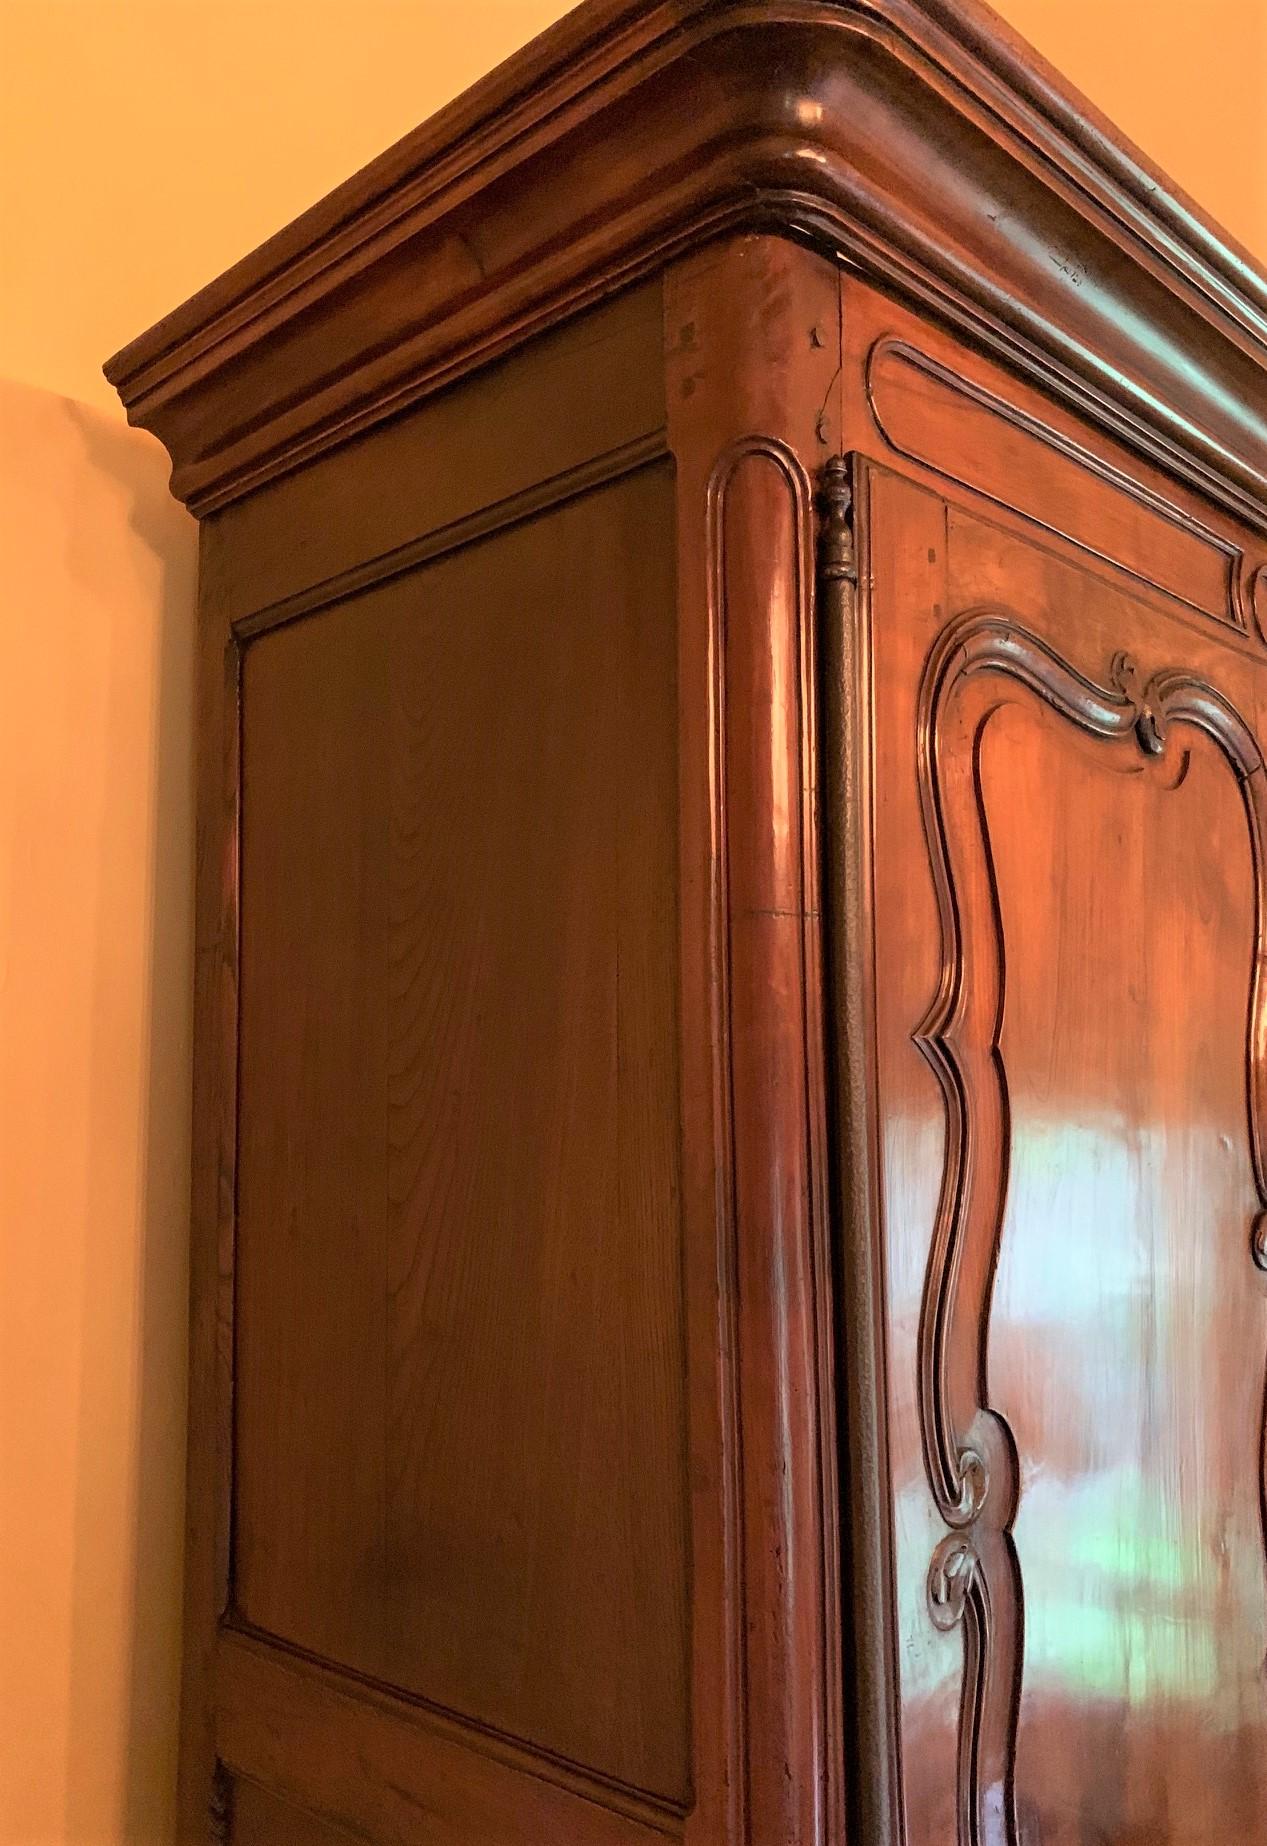 Fabulous 18th century French cherrywood armoire with clean lines and a beautiful warm patina. The four cupboard doors with finely carved and shaped inset panels, and mounted with iron and brass hardware. The entire on a contoured skirt and short